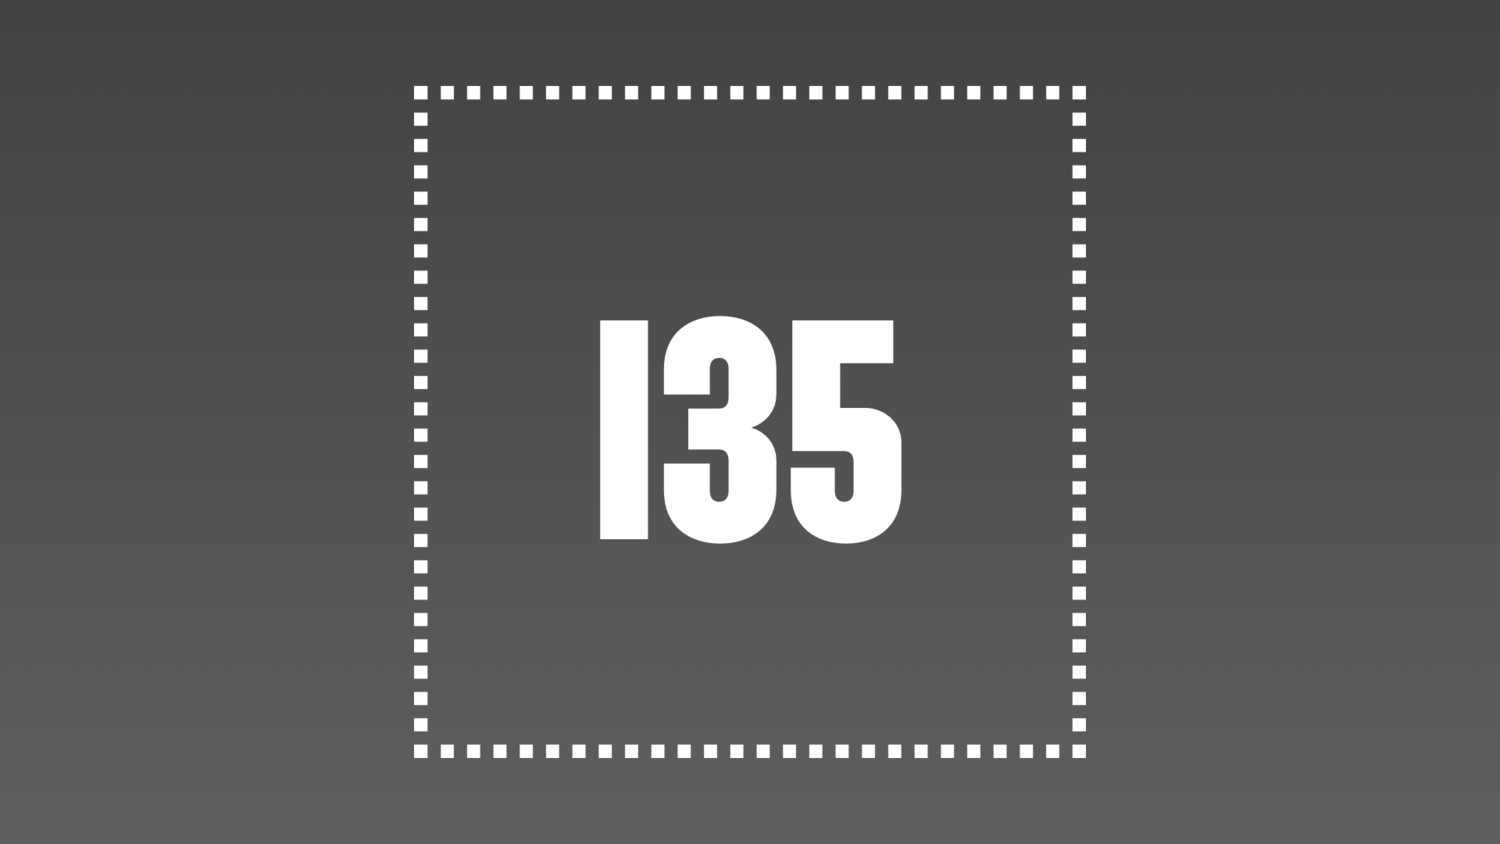 H.I. #135: Place Your Bets